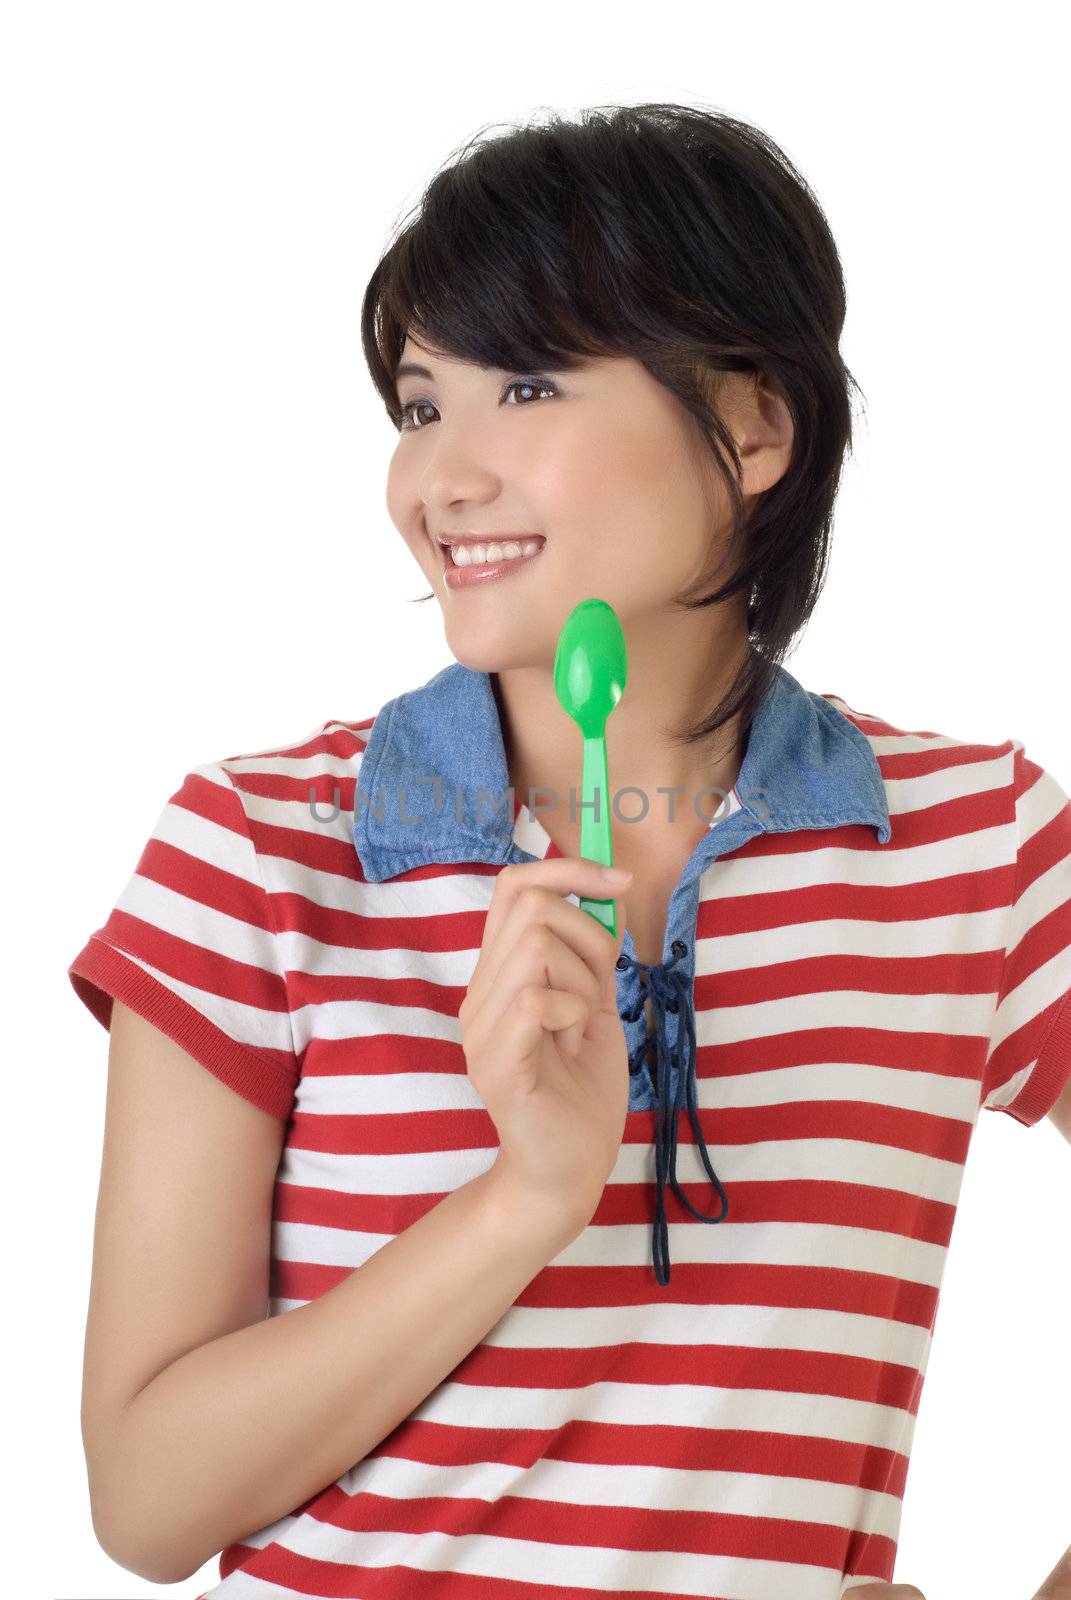 Happy time of eat, closeup portrait of woman holding tablespoon and smiling.